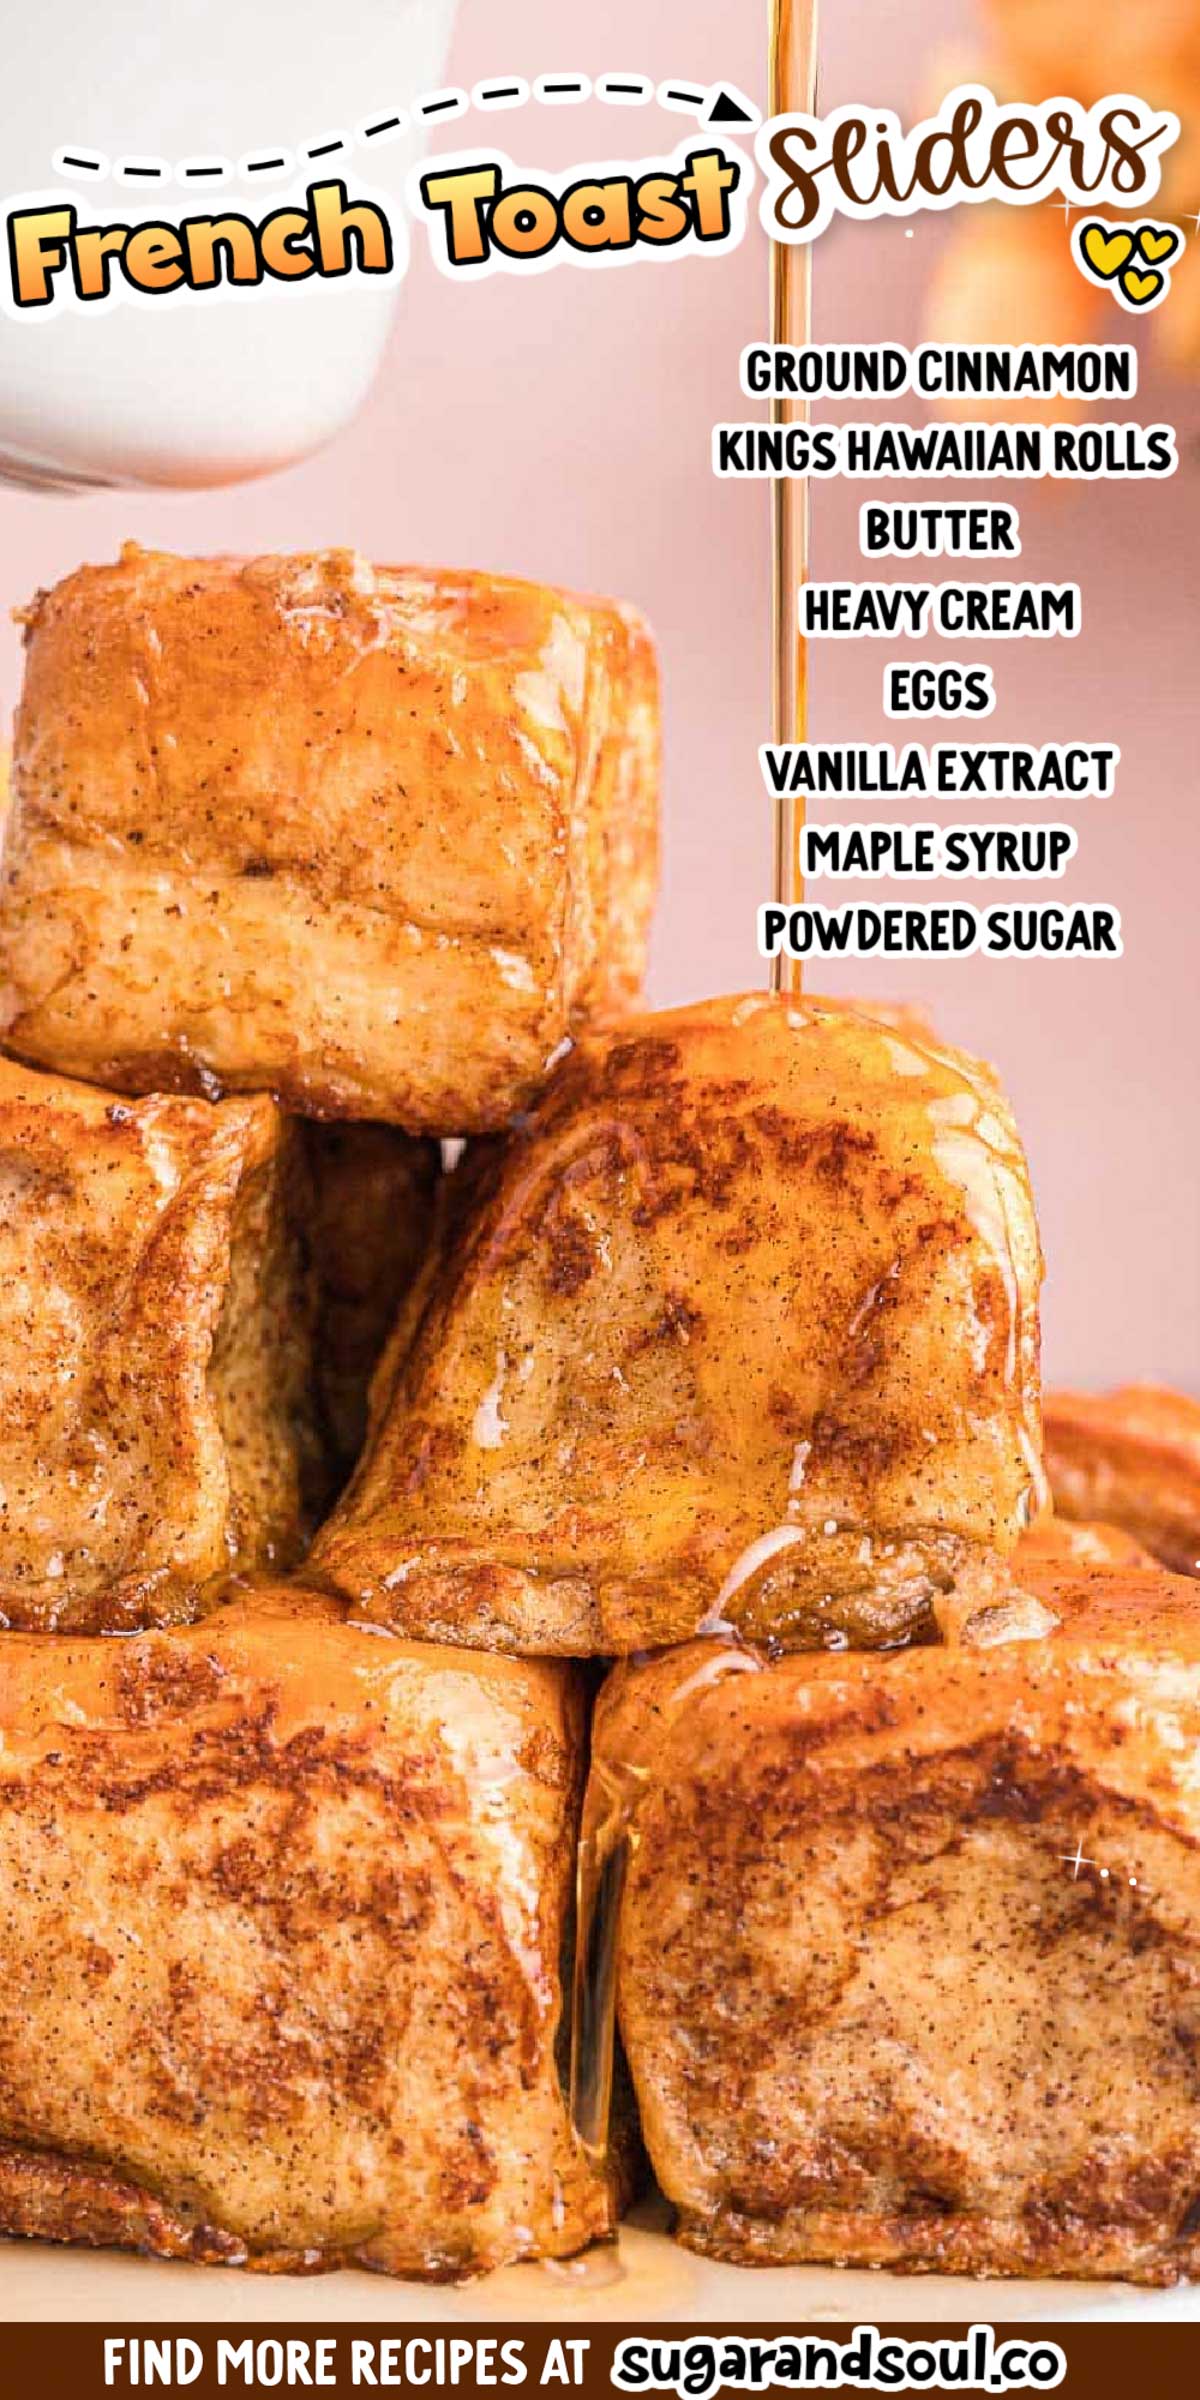 Slider French Toast is made with fluffy Kings Hawaiian Rolls dipped into a 4-ingredient egg wash then cooked to perfection before covering in toppings! A quick, tasty breakfast that hits the table in just 30 minutes! via @sugarandsoulco